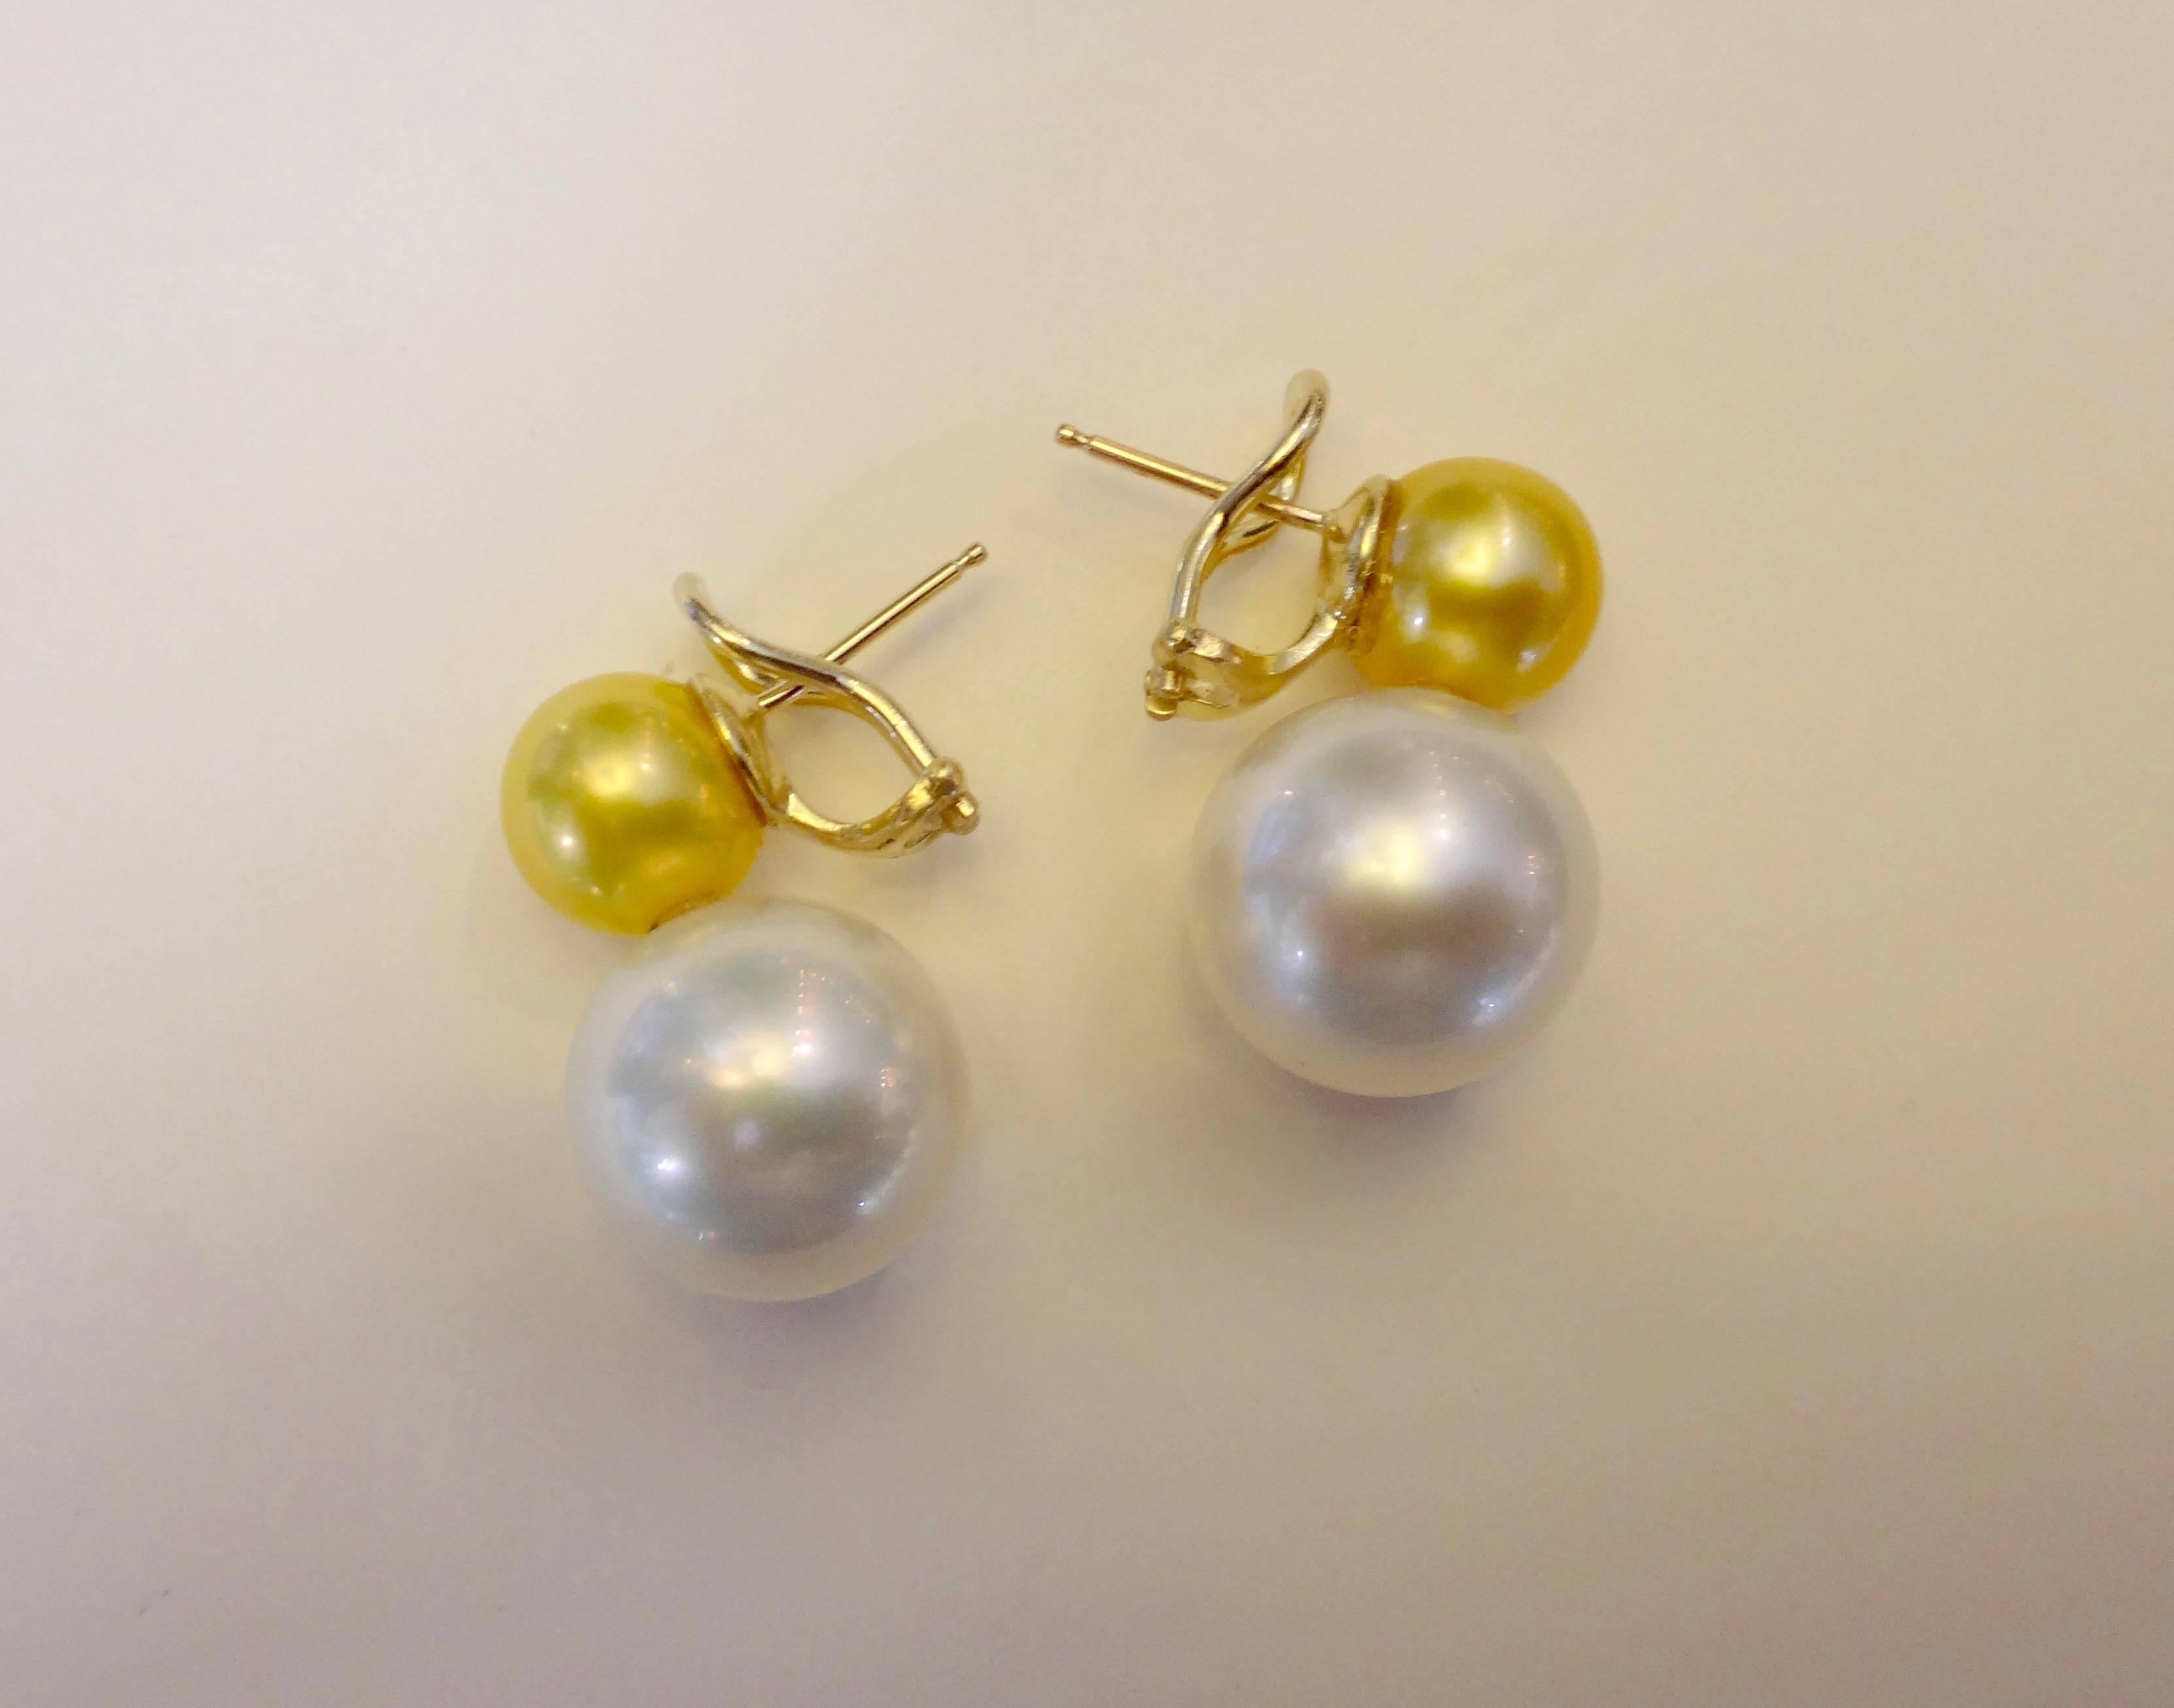 Contemporary Michael Kneebone Golden and White South Seas Pearl Earrings